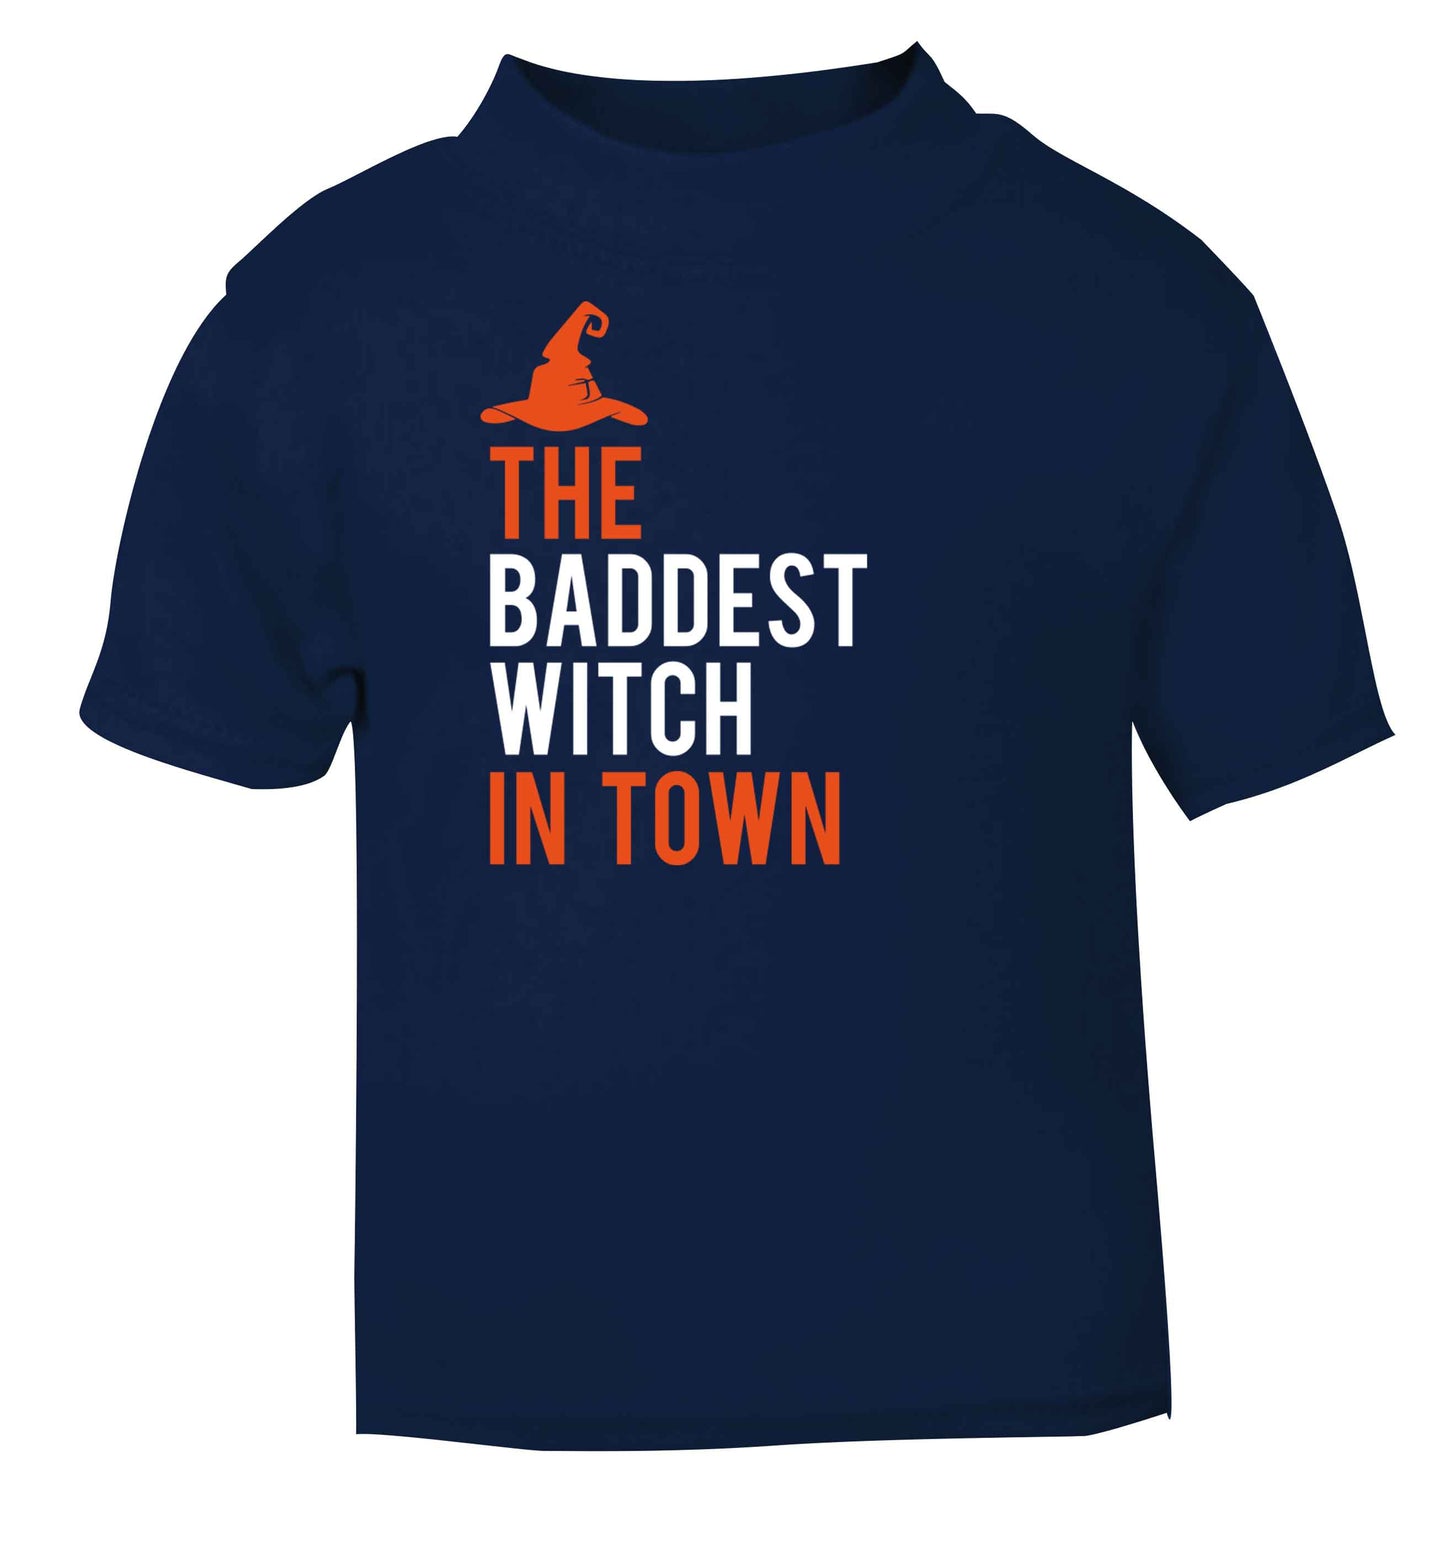 Badest witch in town navy baby toddler Tshirt 2 Years